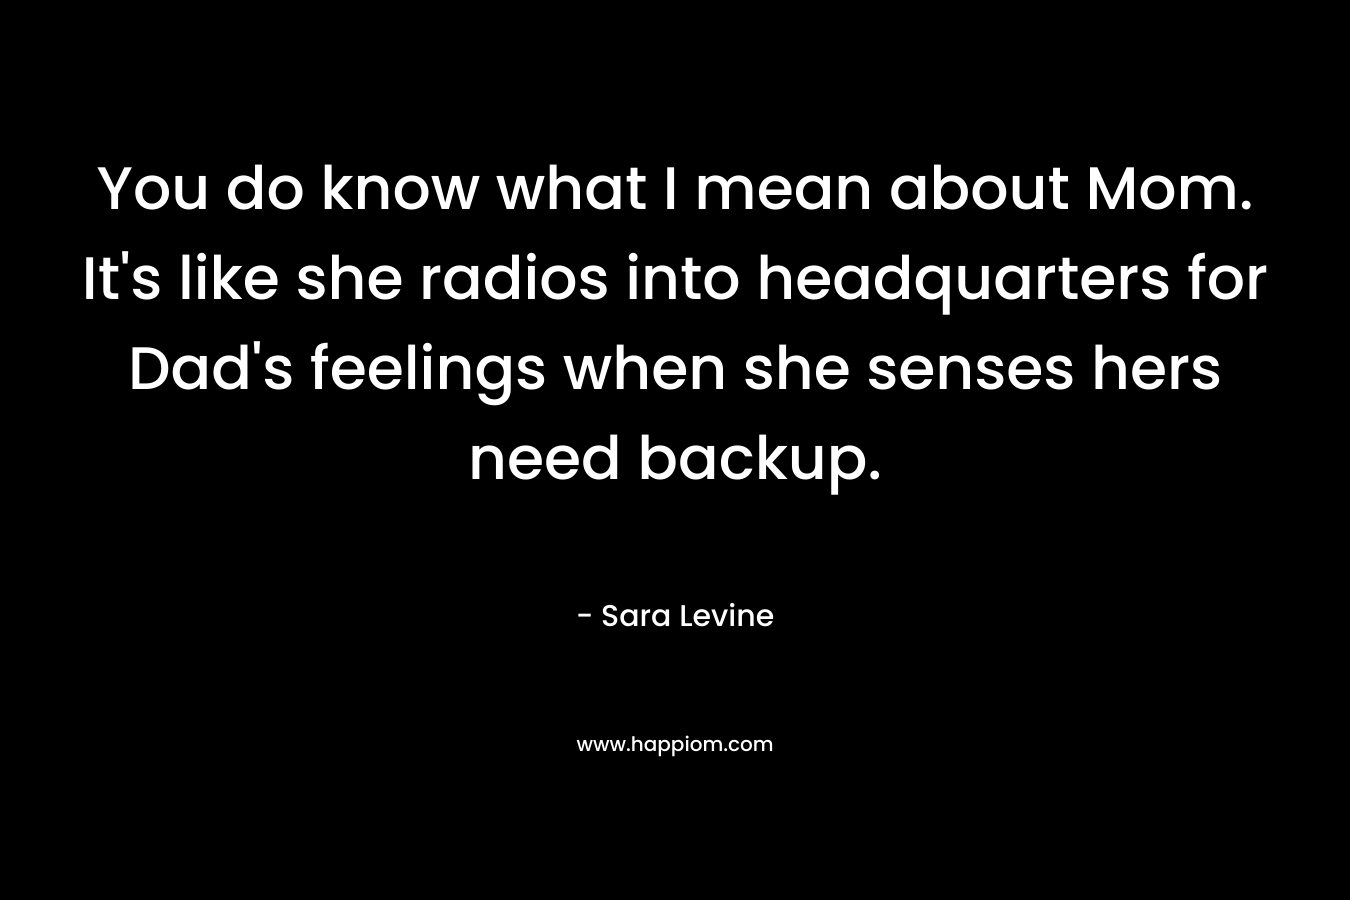 You do know what I mean about Mom. It’s like she radios into headquarters for Dad’s feelings when she senses hers need backup. – Sara Levine